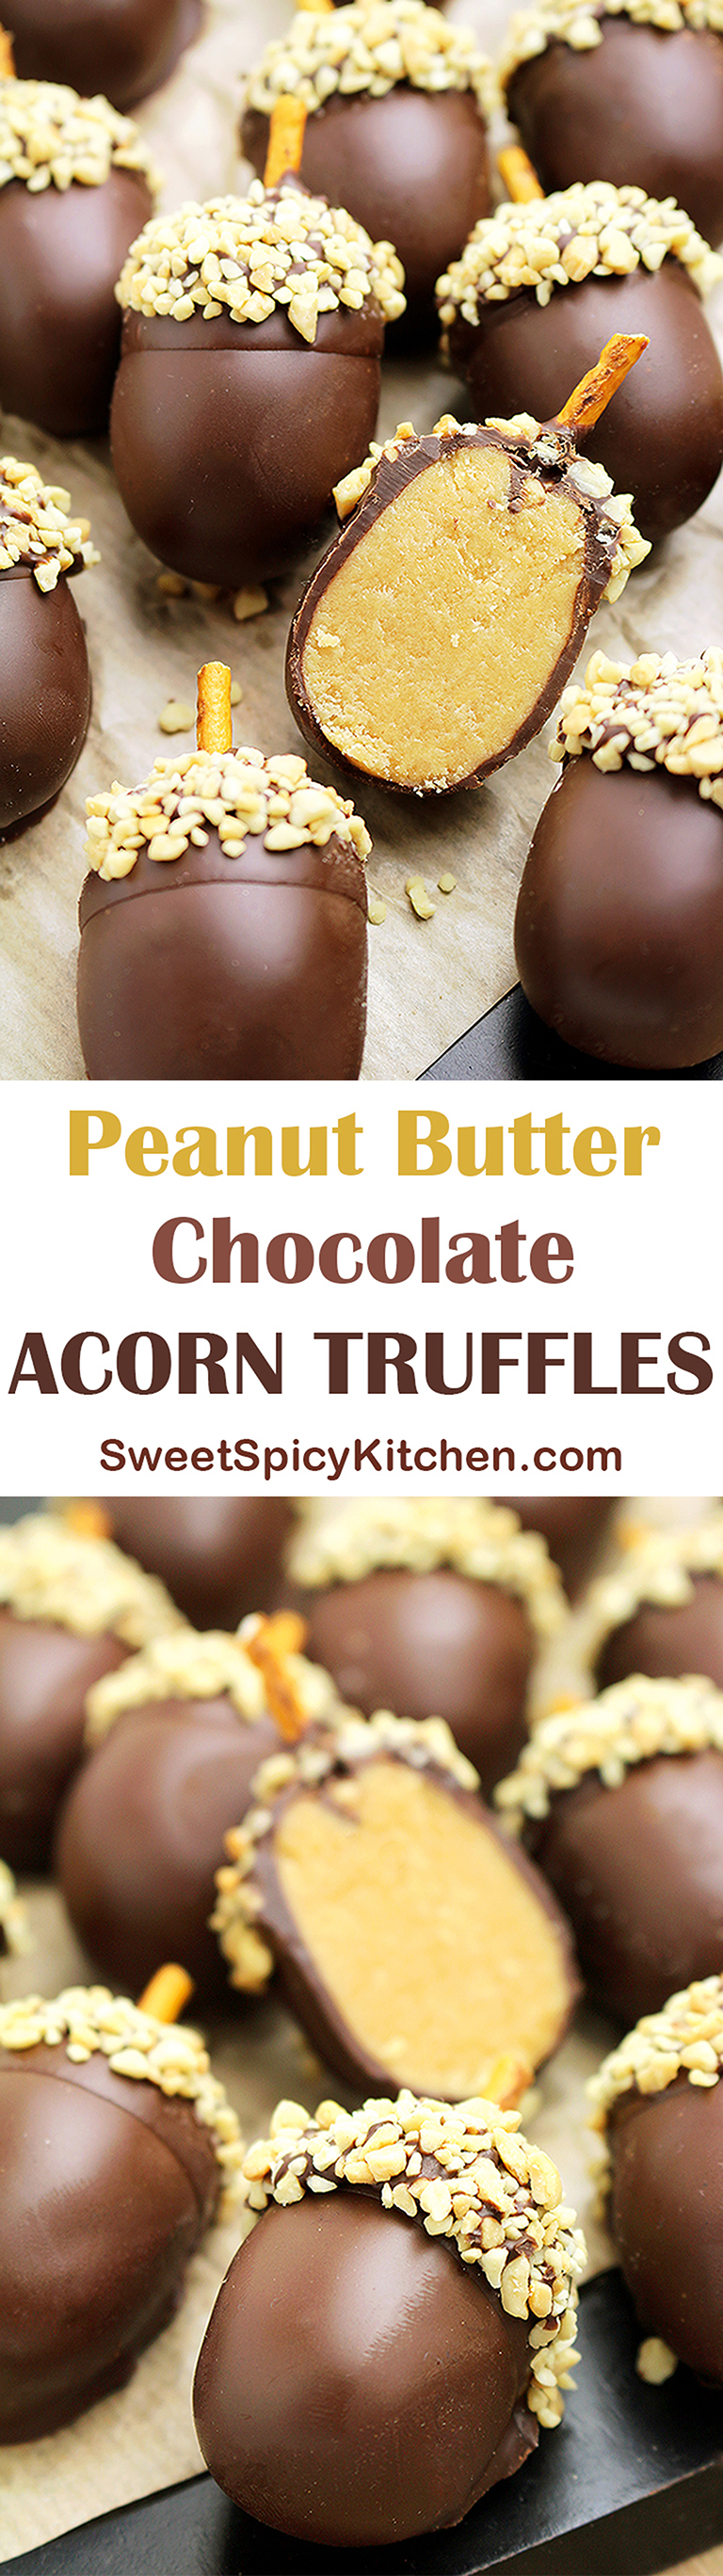 Looking for a perfect fall dessert? I was going through my cook book and found this recipe that I would like to share with you – Peanut Butter Chocolate Acorn Truffles ♥